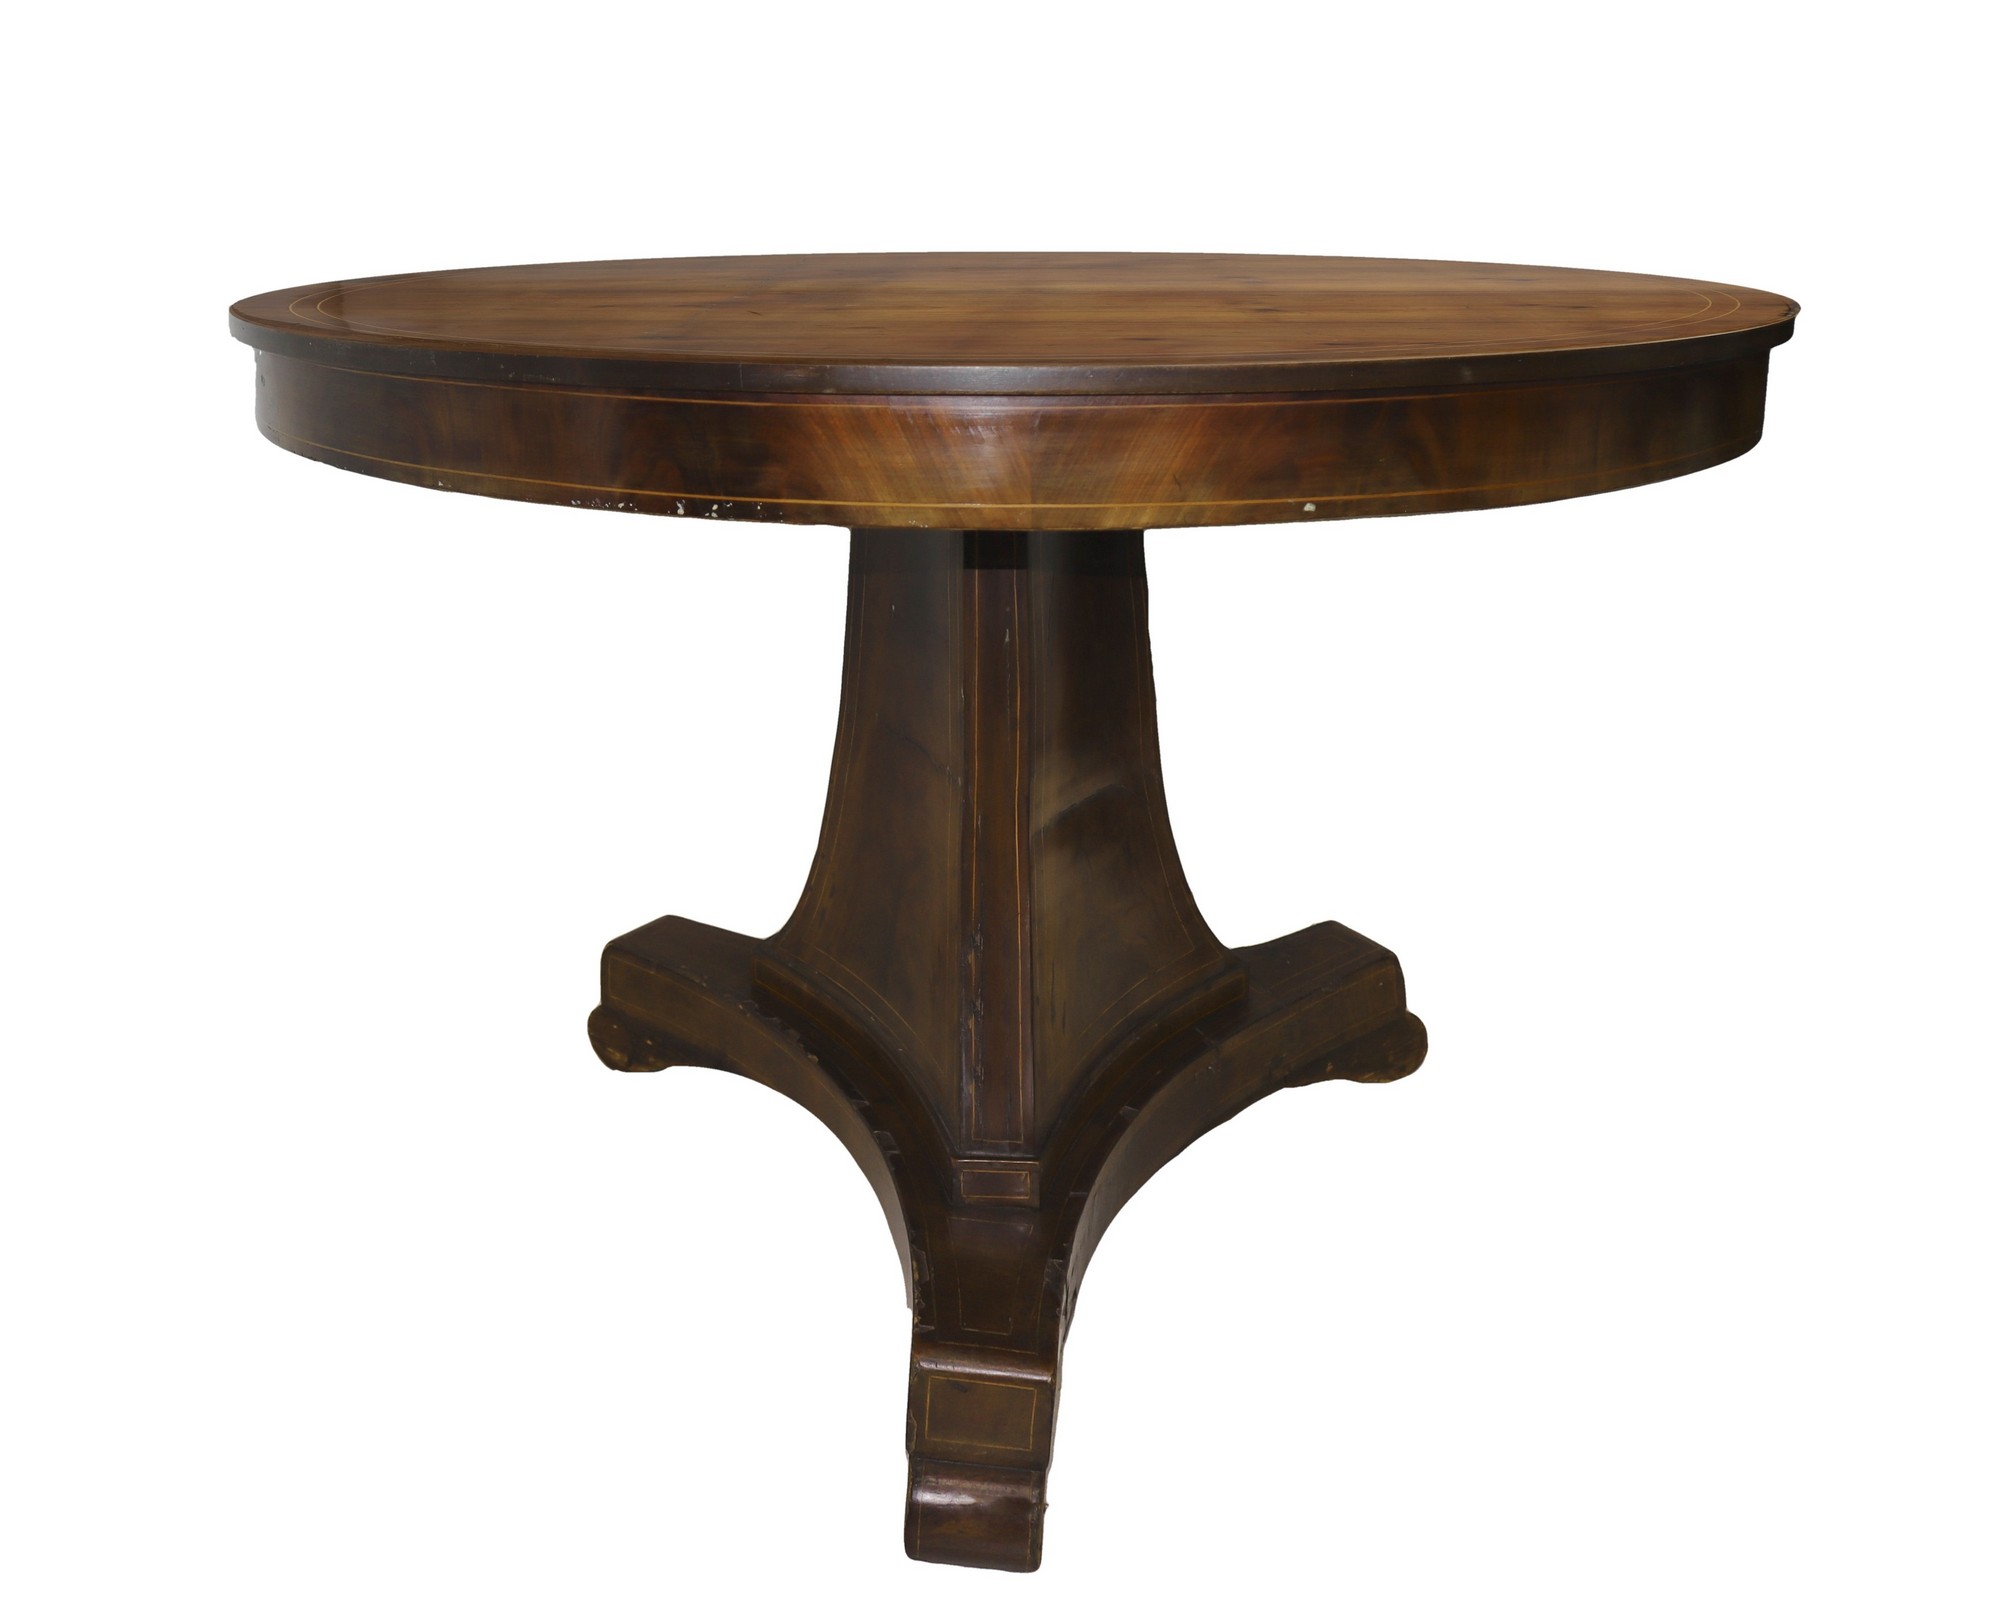 Round table in mahogany wood with 6 chairs, nineteenth century - Image 2 of 6